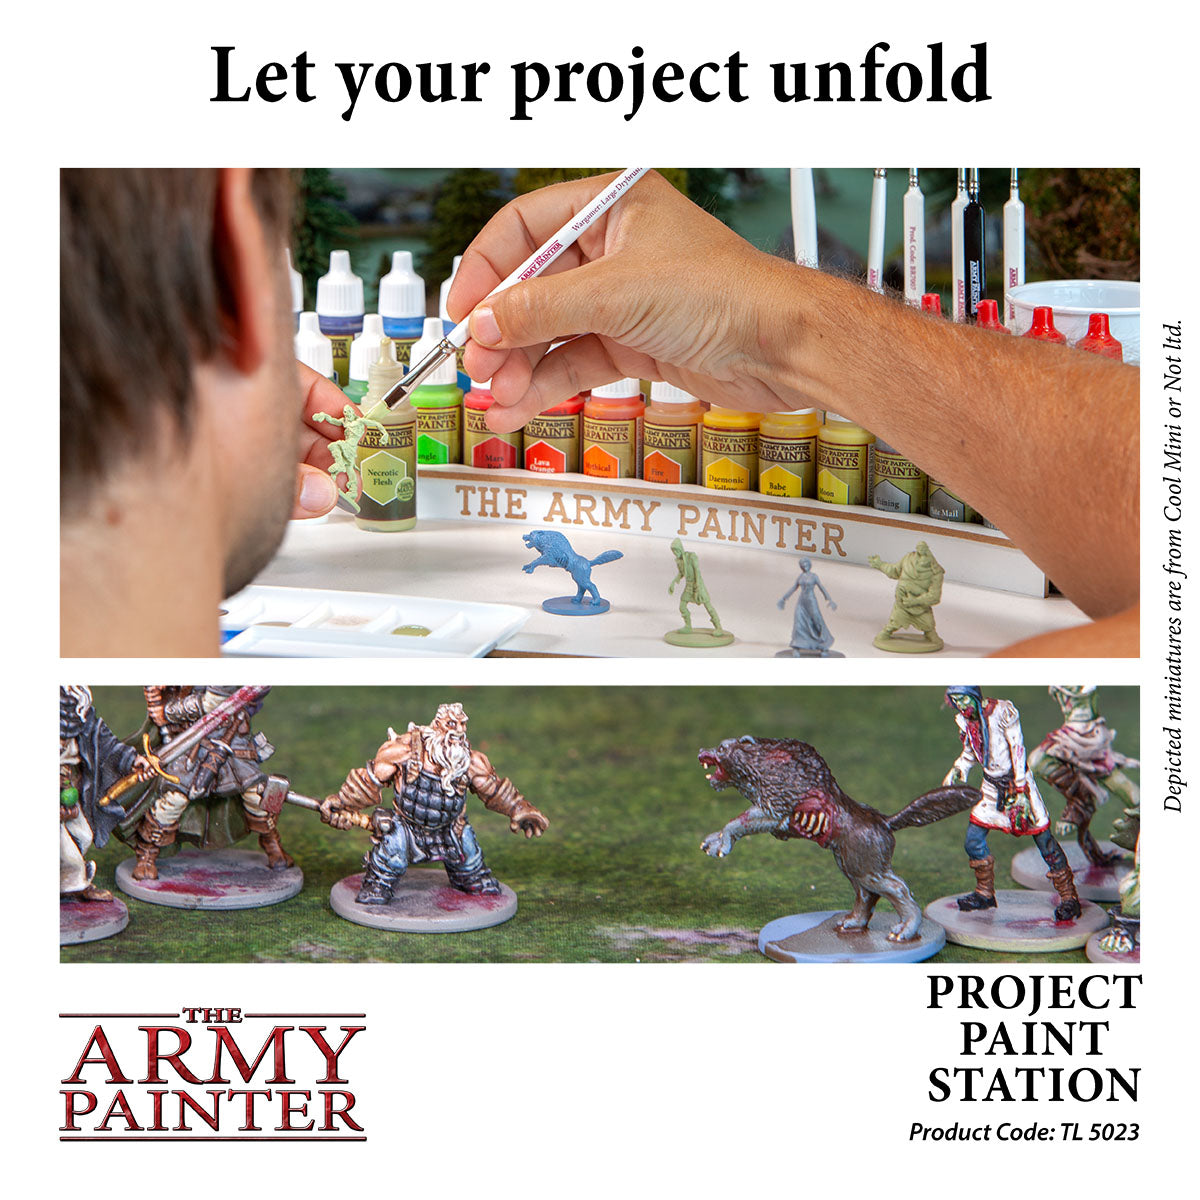 Project Paint Station (The Army Painter)